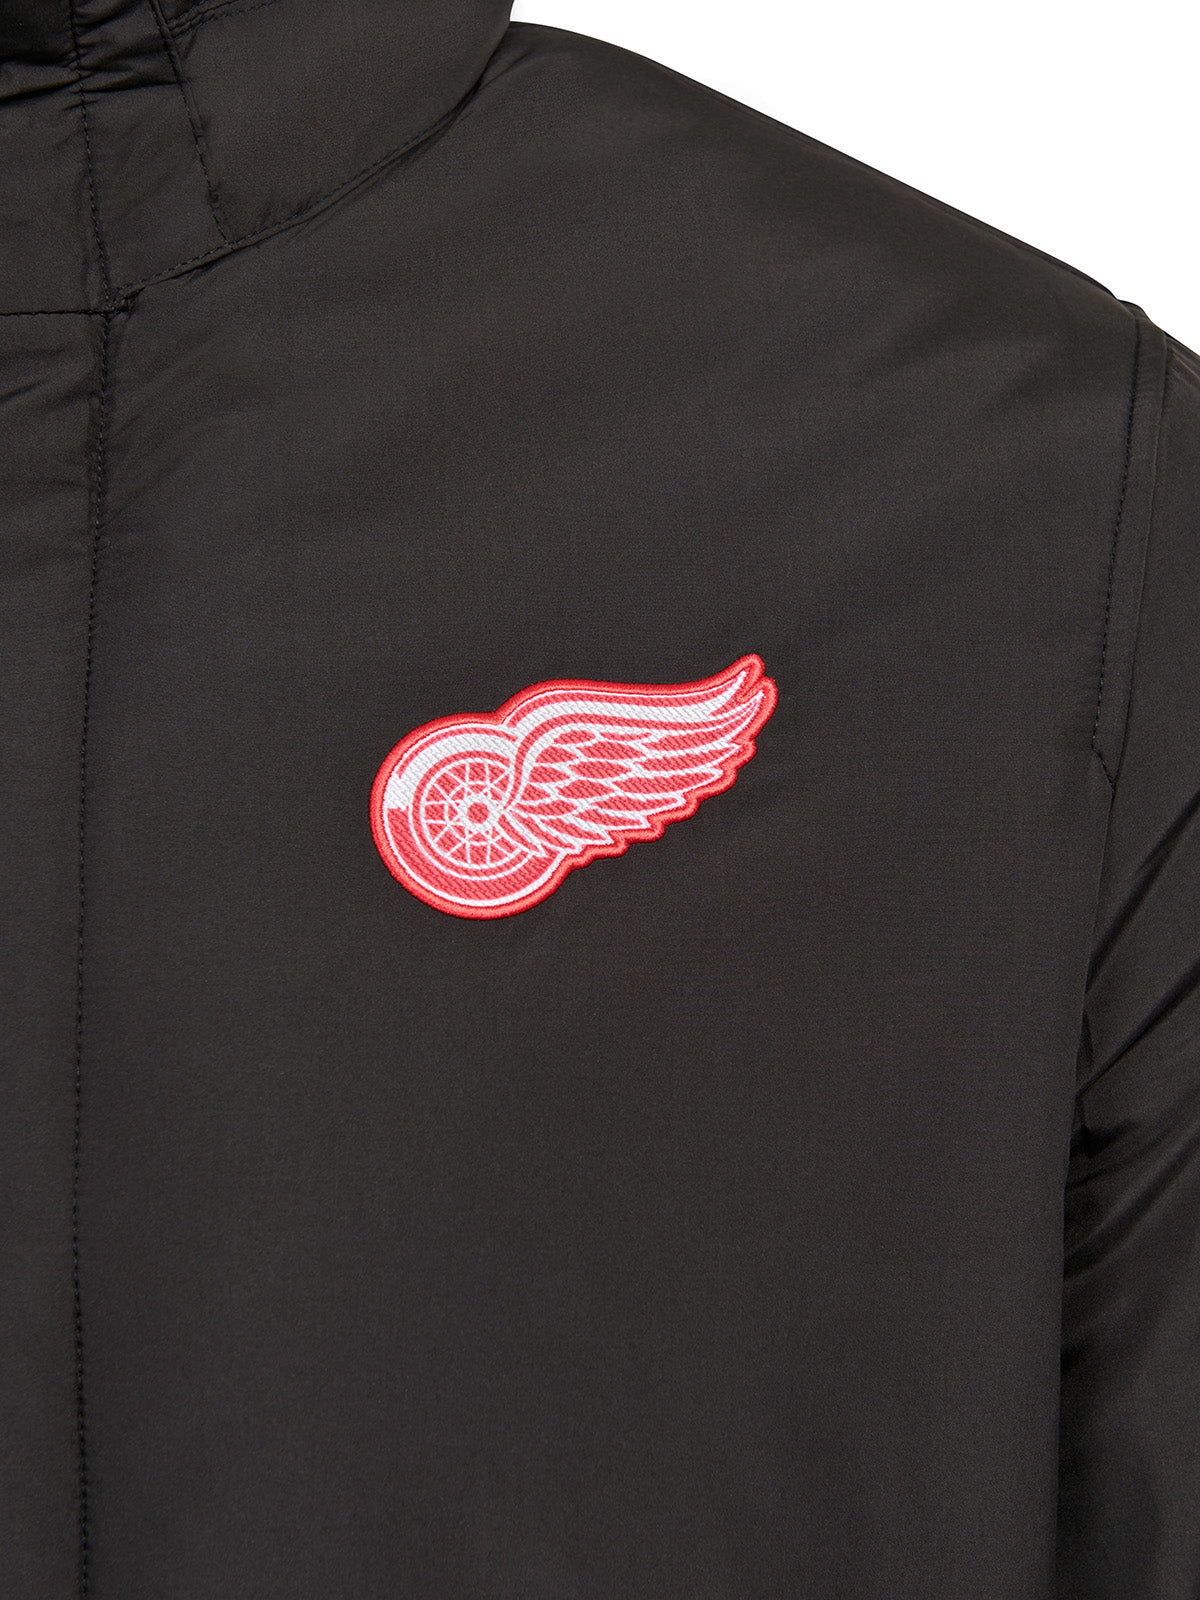 Detroit Red Wings Coach's Jacket